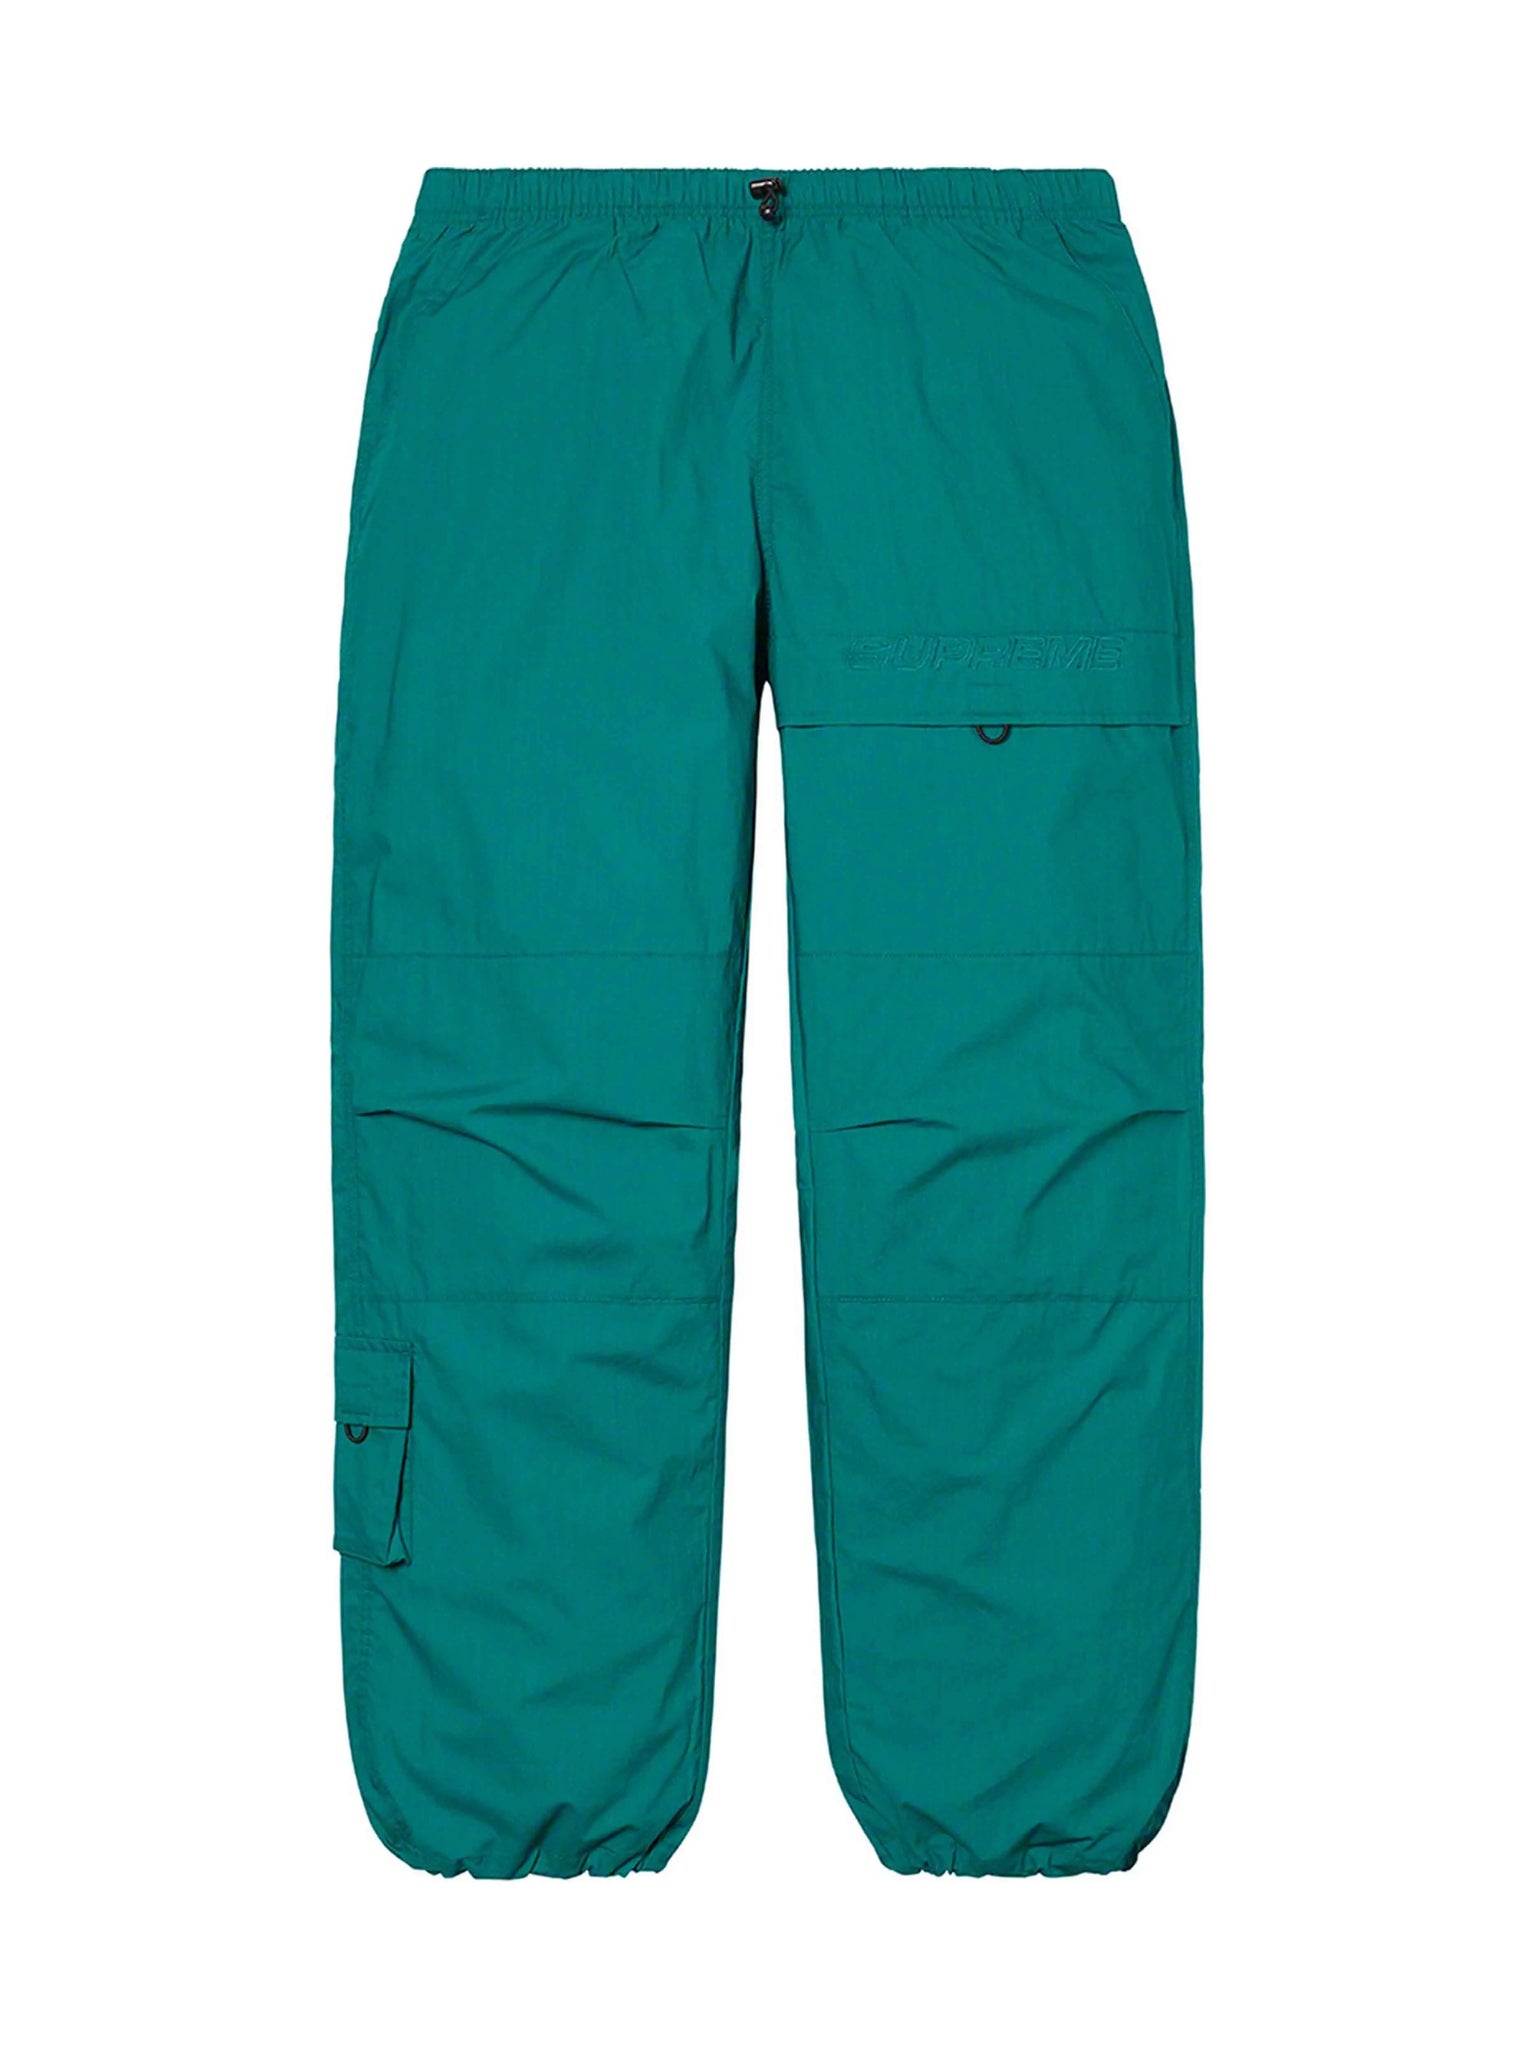 Supreme Cotton Cinch Pant Teal [SS21] Prior